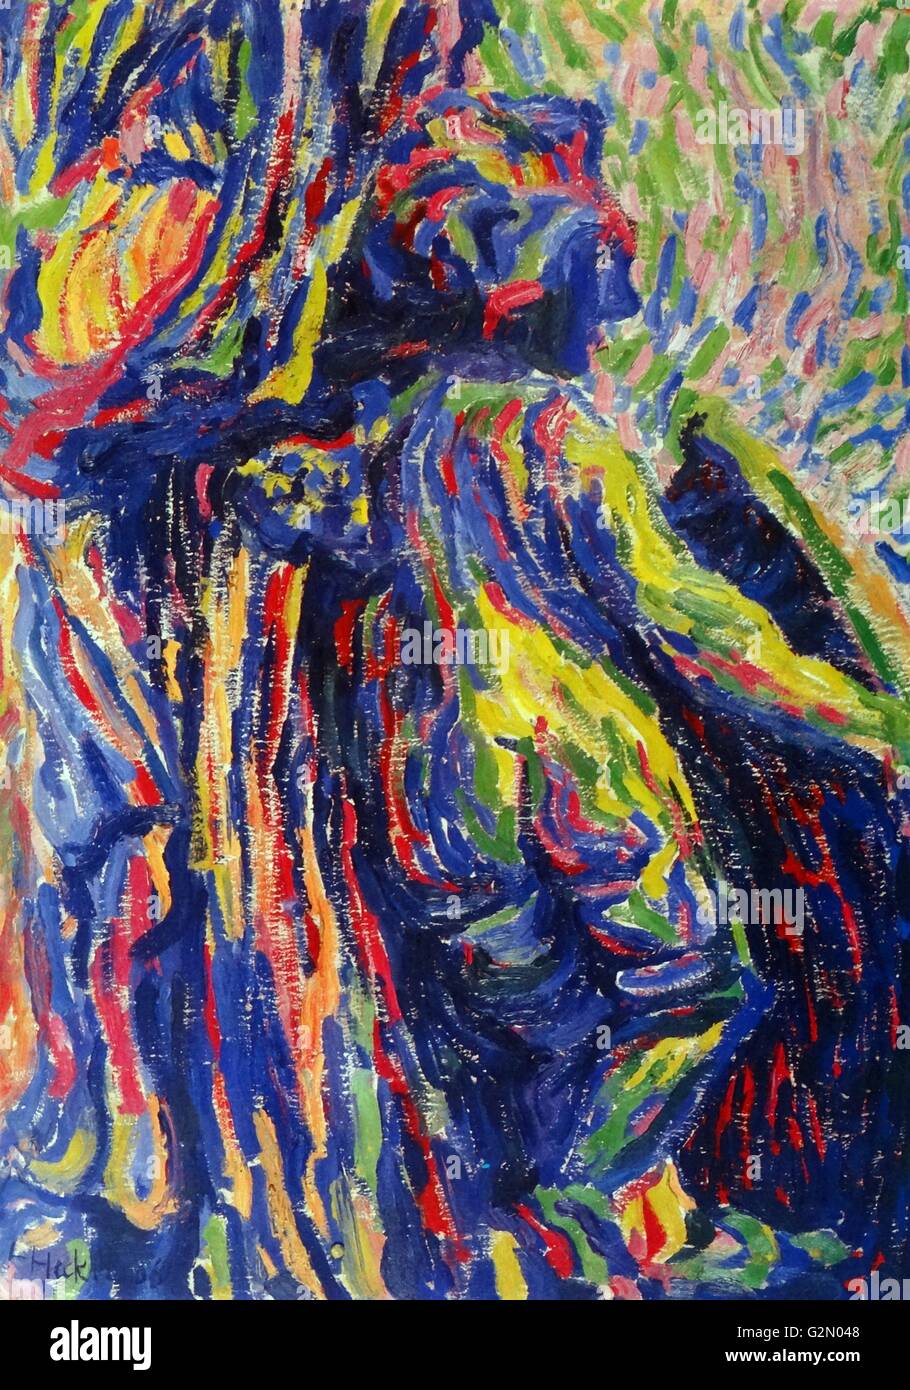 Oil on canvas painting by the German artist Erich Heckel (31st July 1883 - 27th January 1970) work titled Putto (stone figure)'. Completed in 1906. Stock Photo